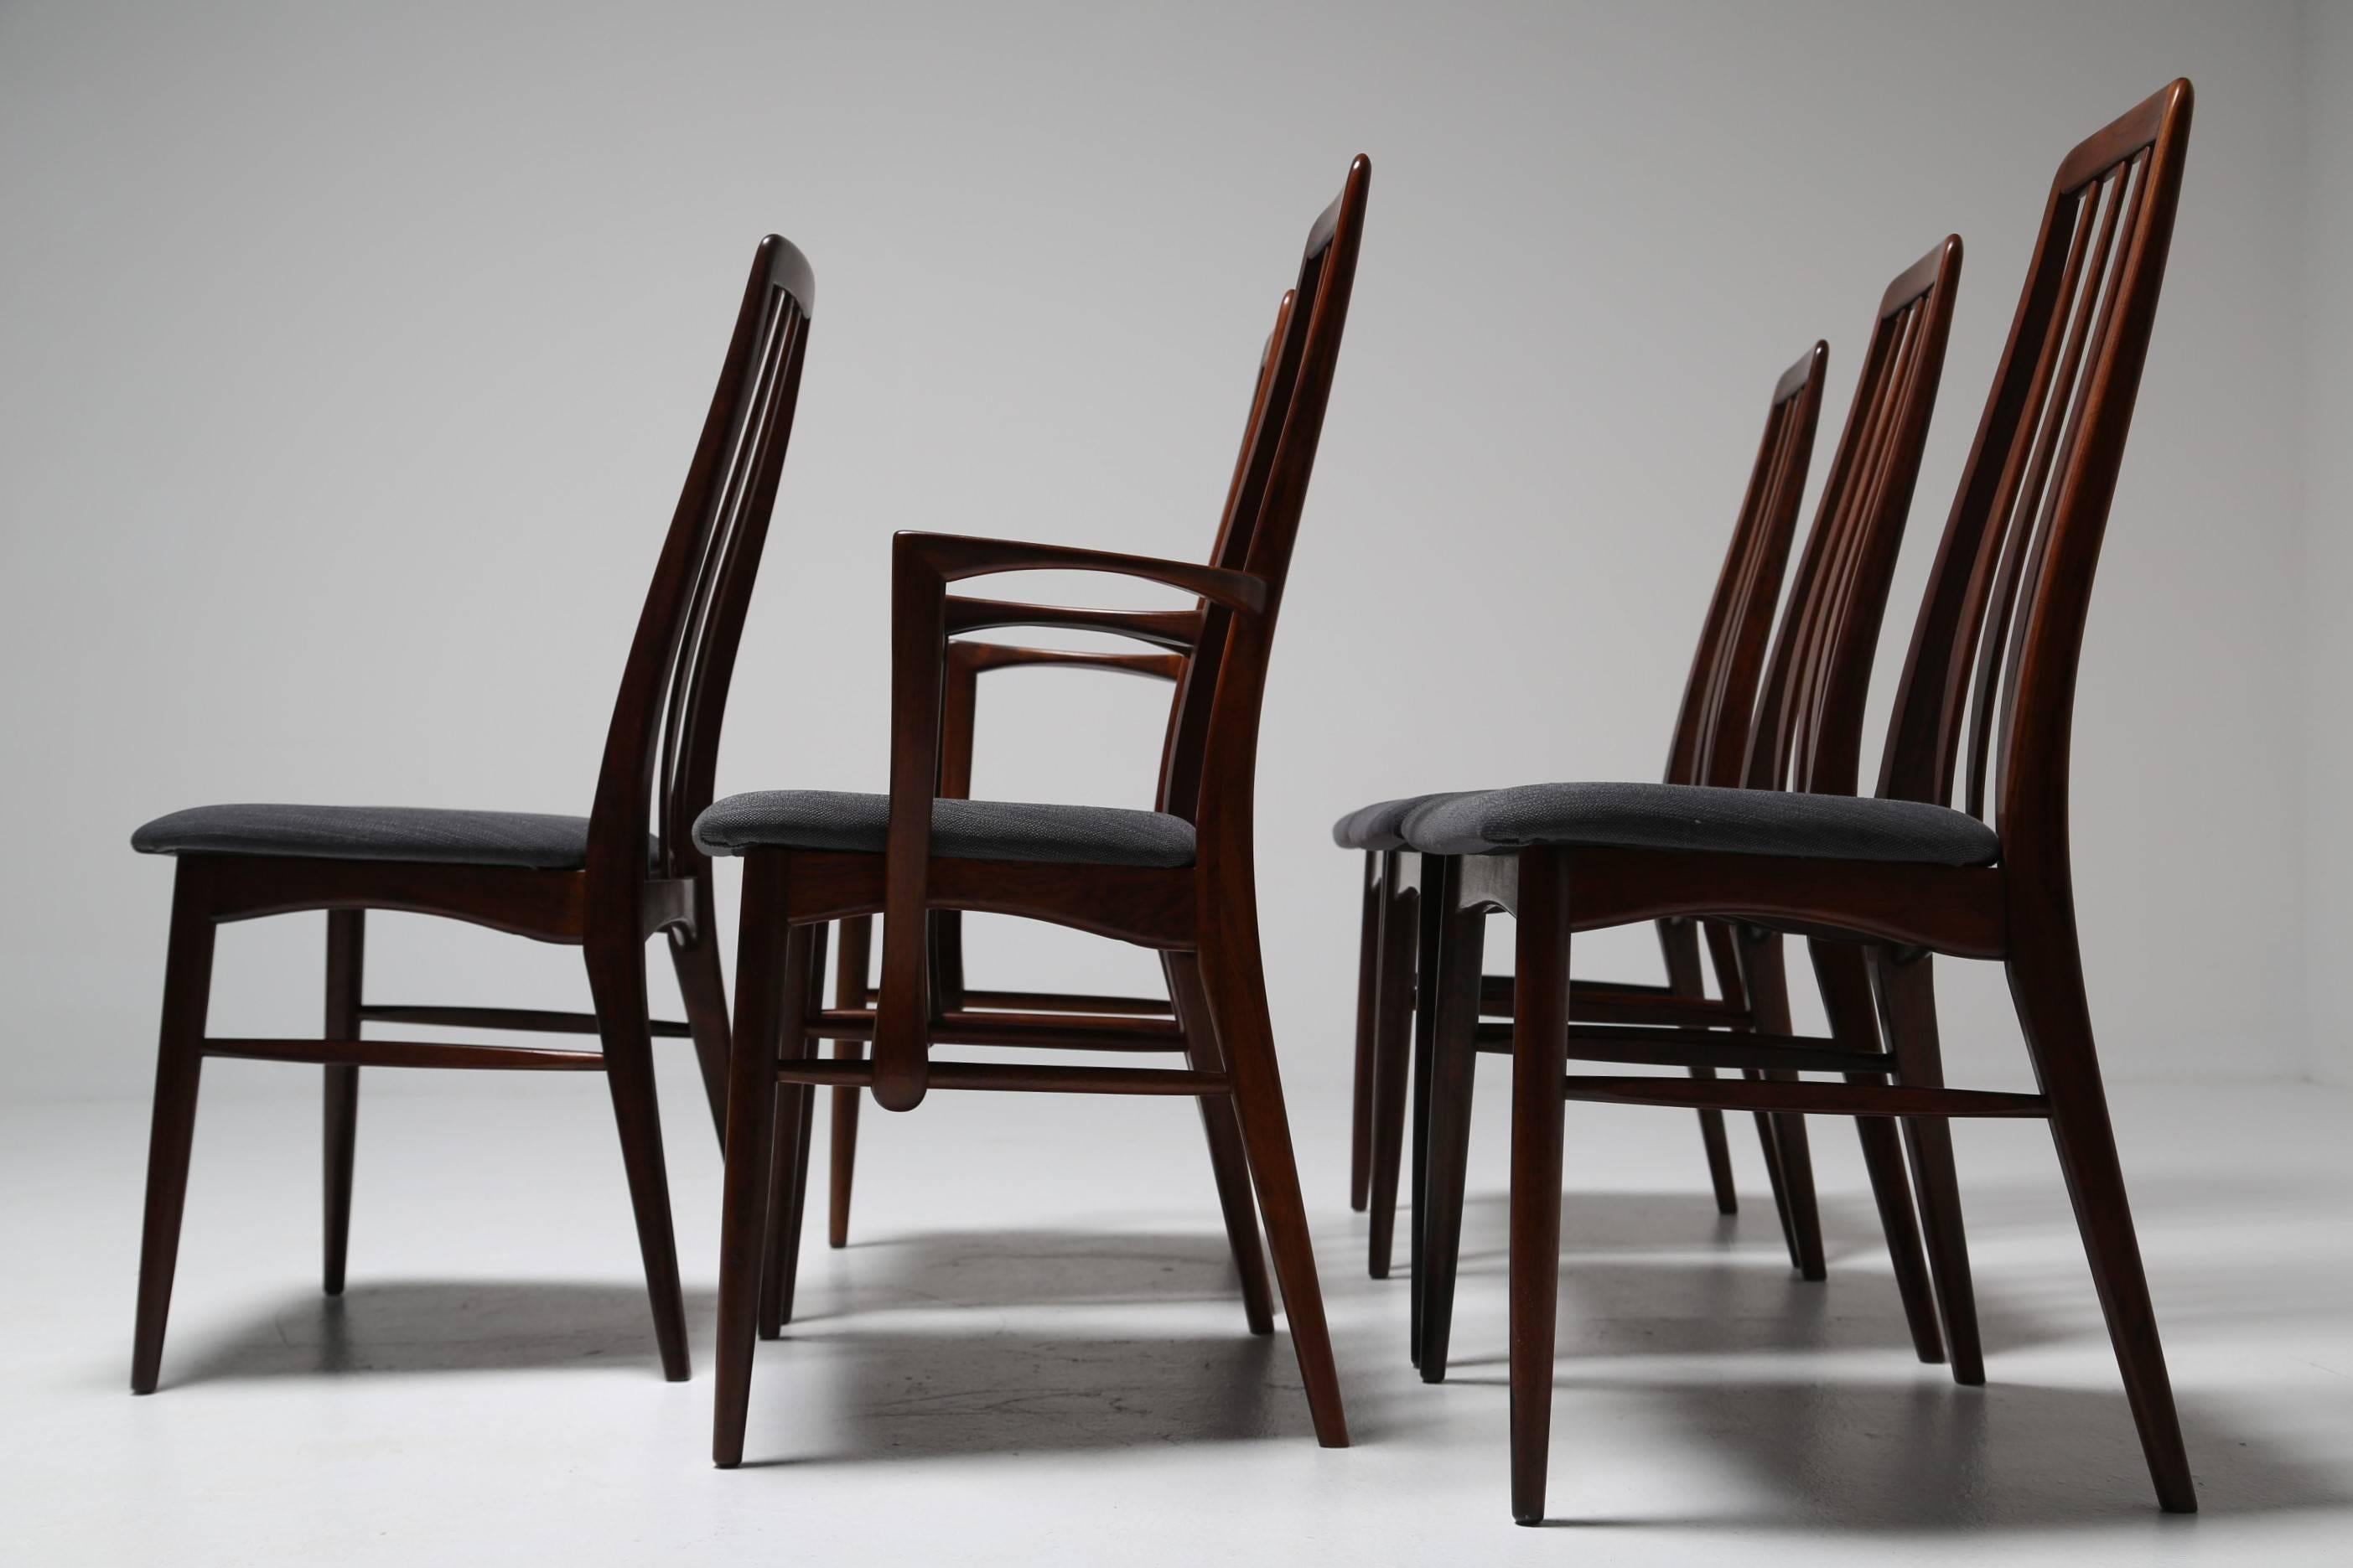 A stunning set of six 'Eva' dining chairs by Danish designer Niels Koefoed. Lightweight yet sturdy there are two Carvers among this beautifully designed set. There is a gentle angle to the back of the chairs and all chairs have been newly